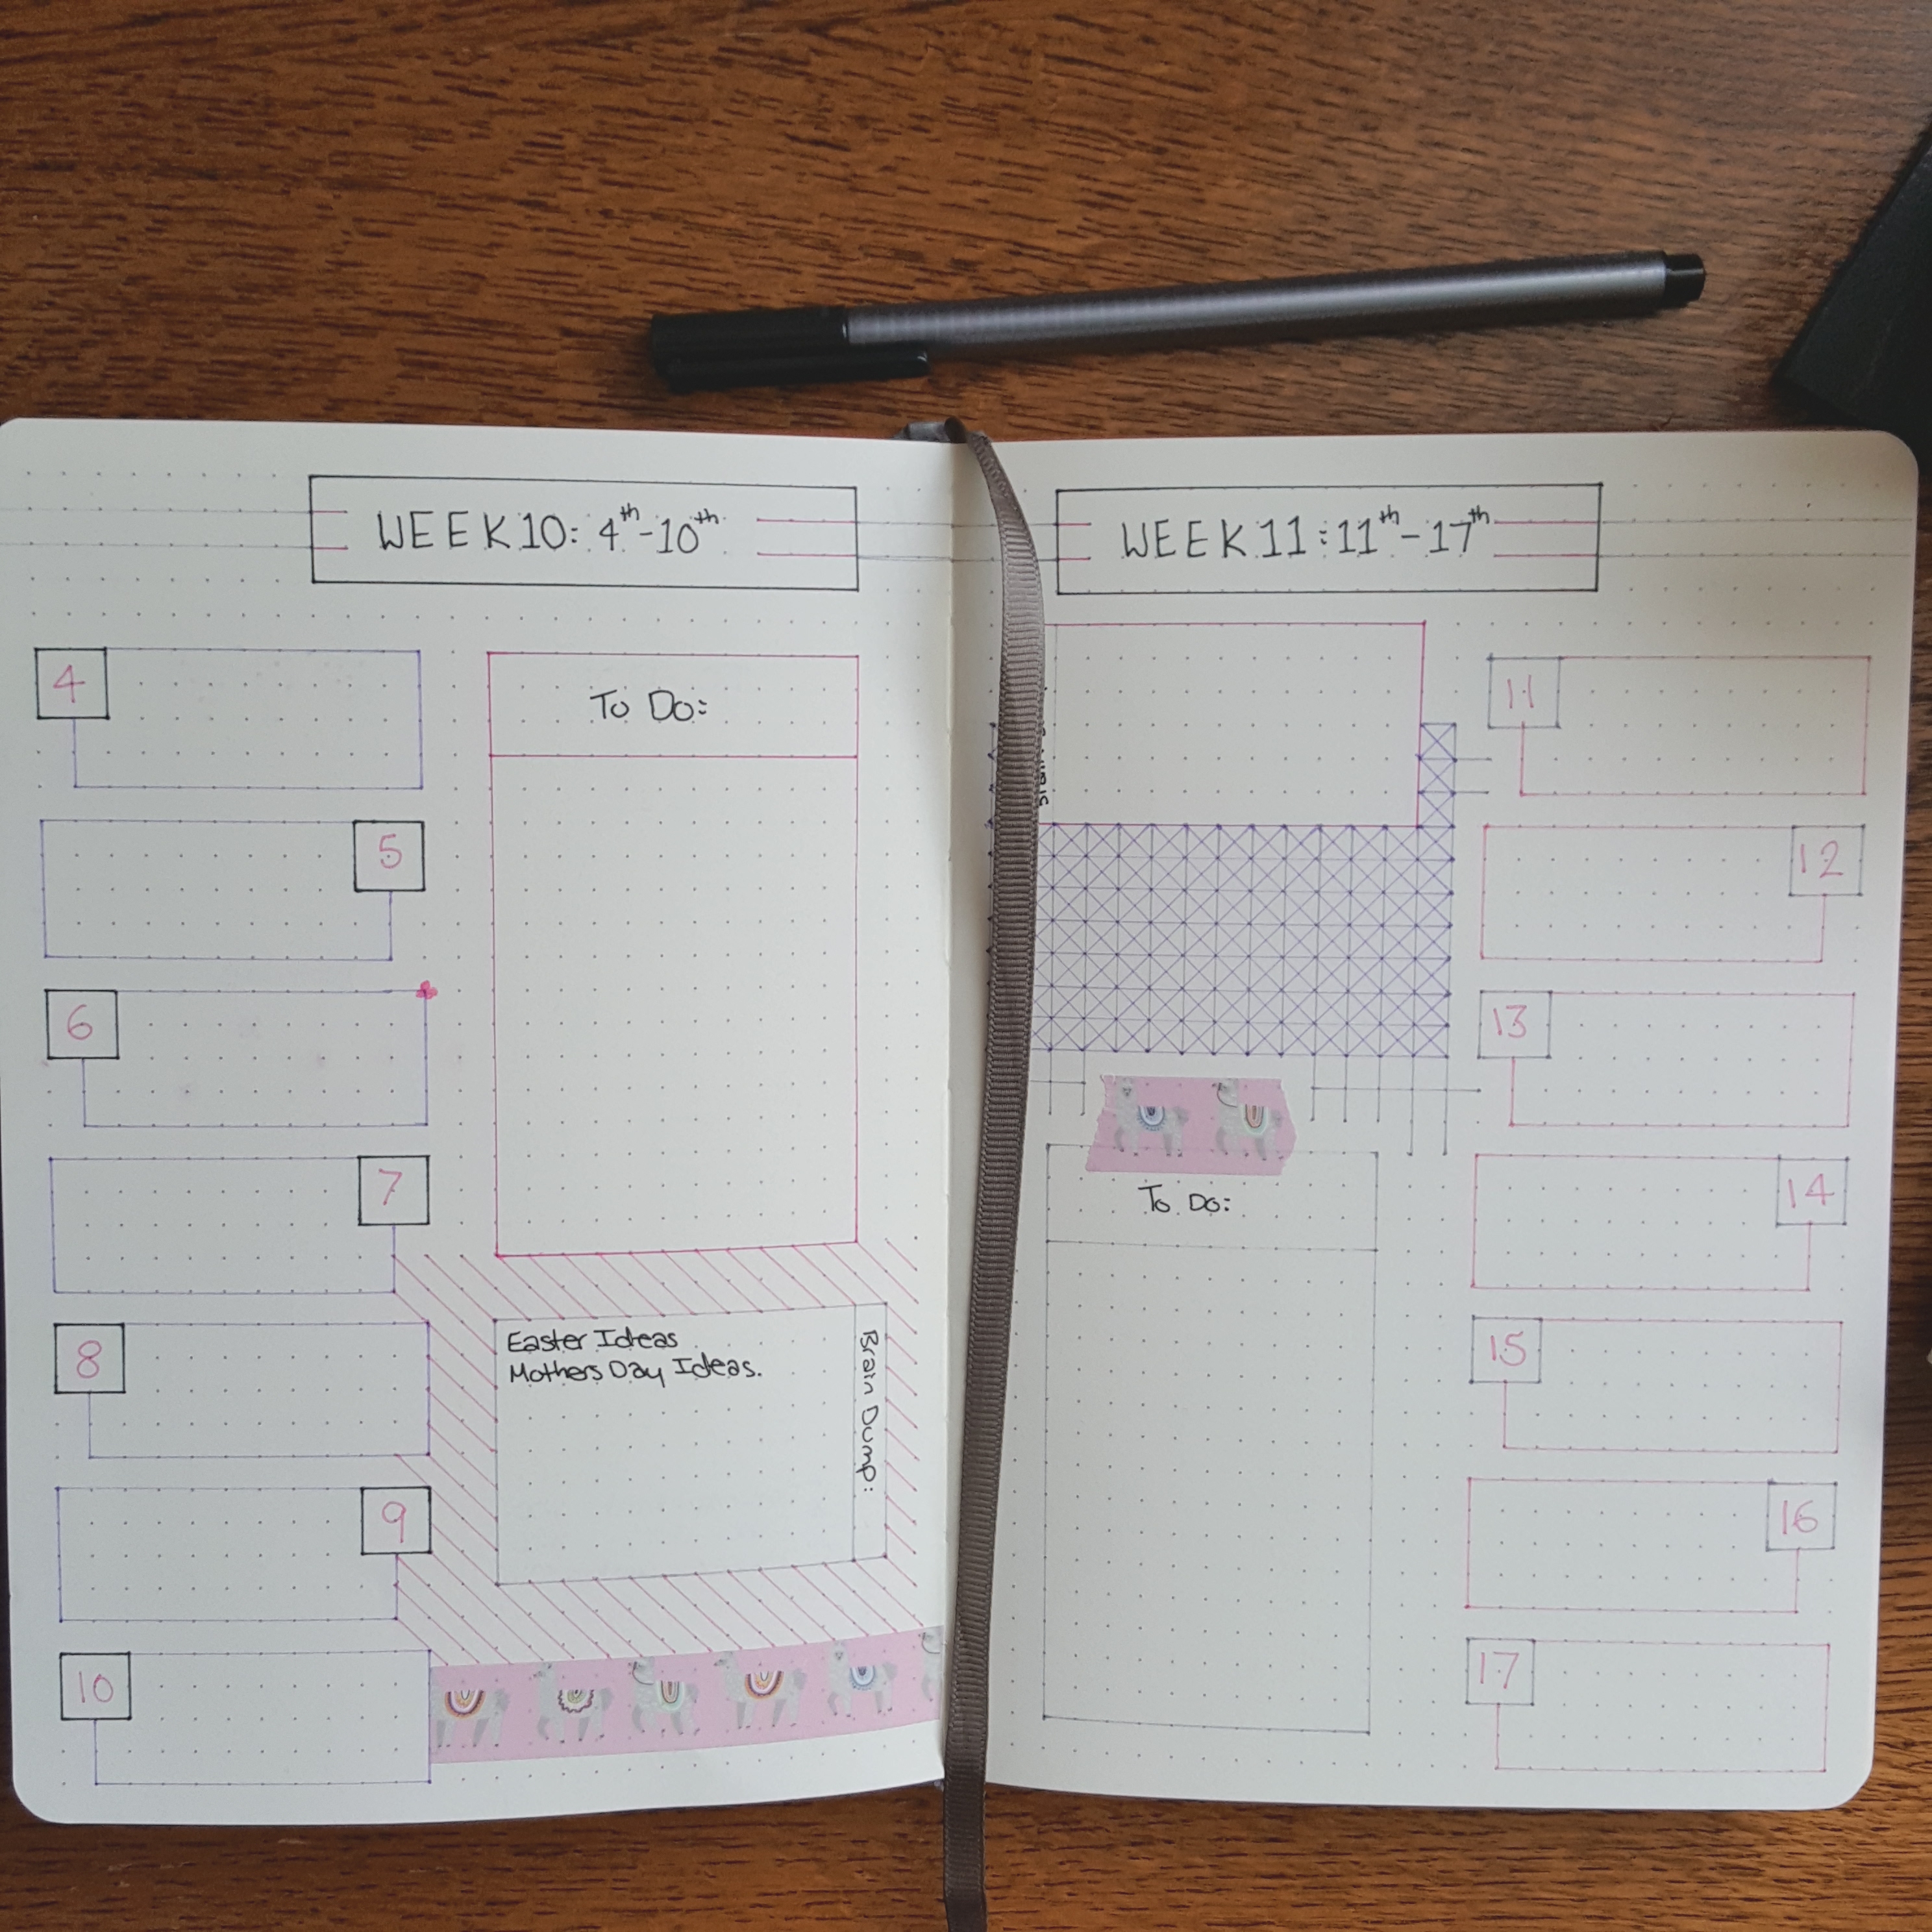 https://talilifestyle.com/2019/03/04/bullet-journal-march/